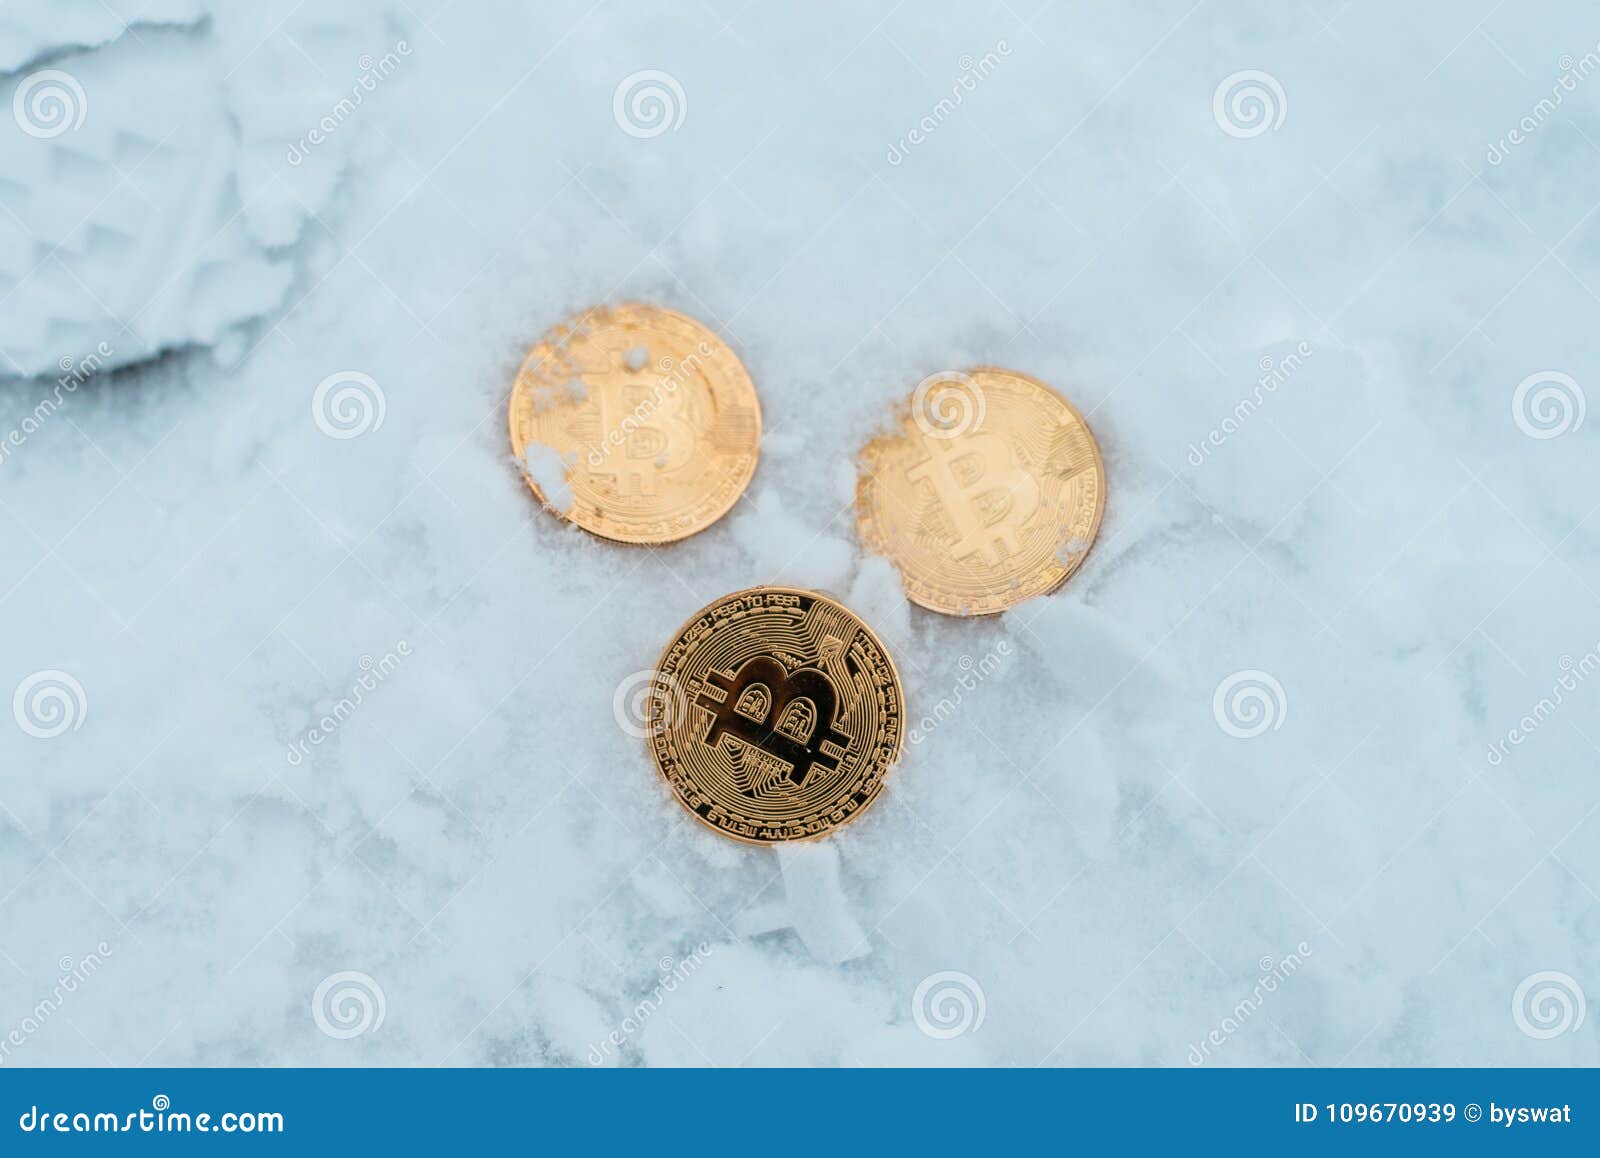 Metal Gold Coins Bitcoin, Crypto Currency In Winter On ...